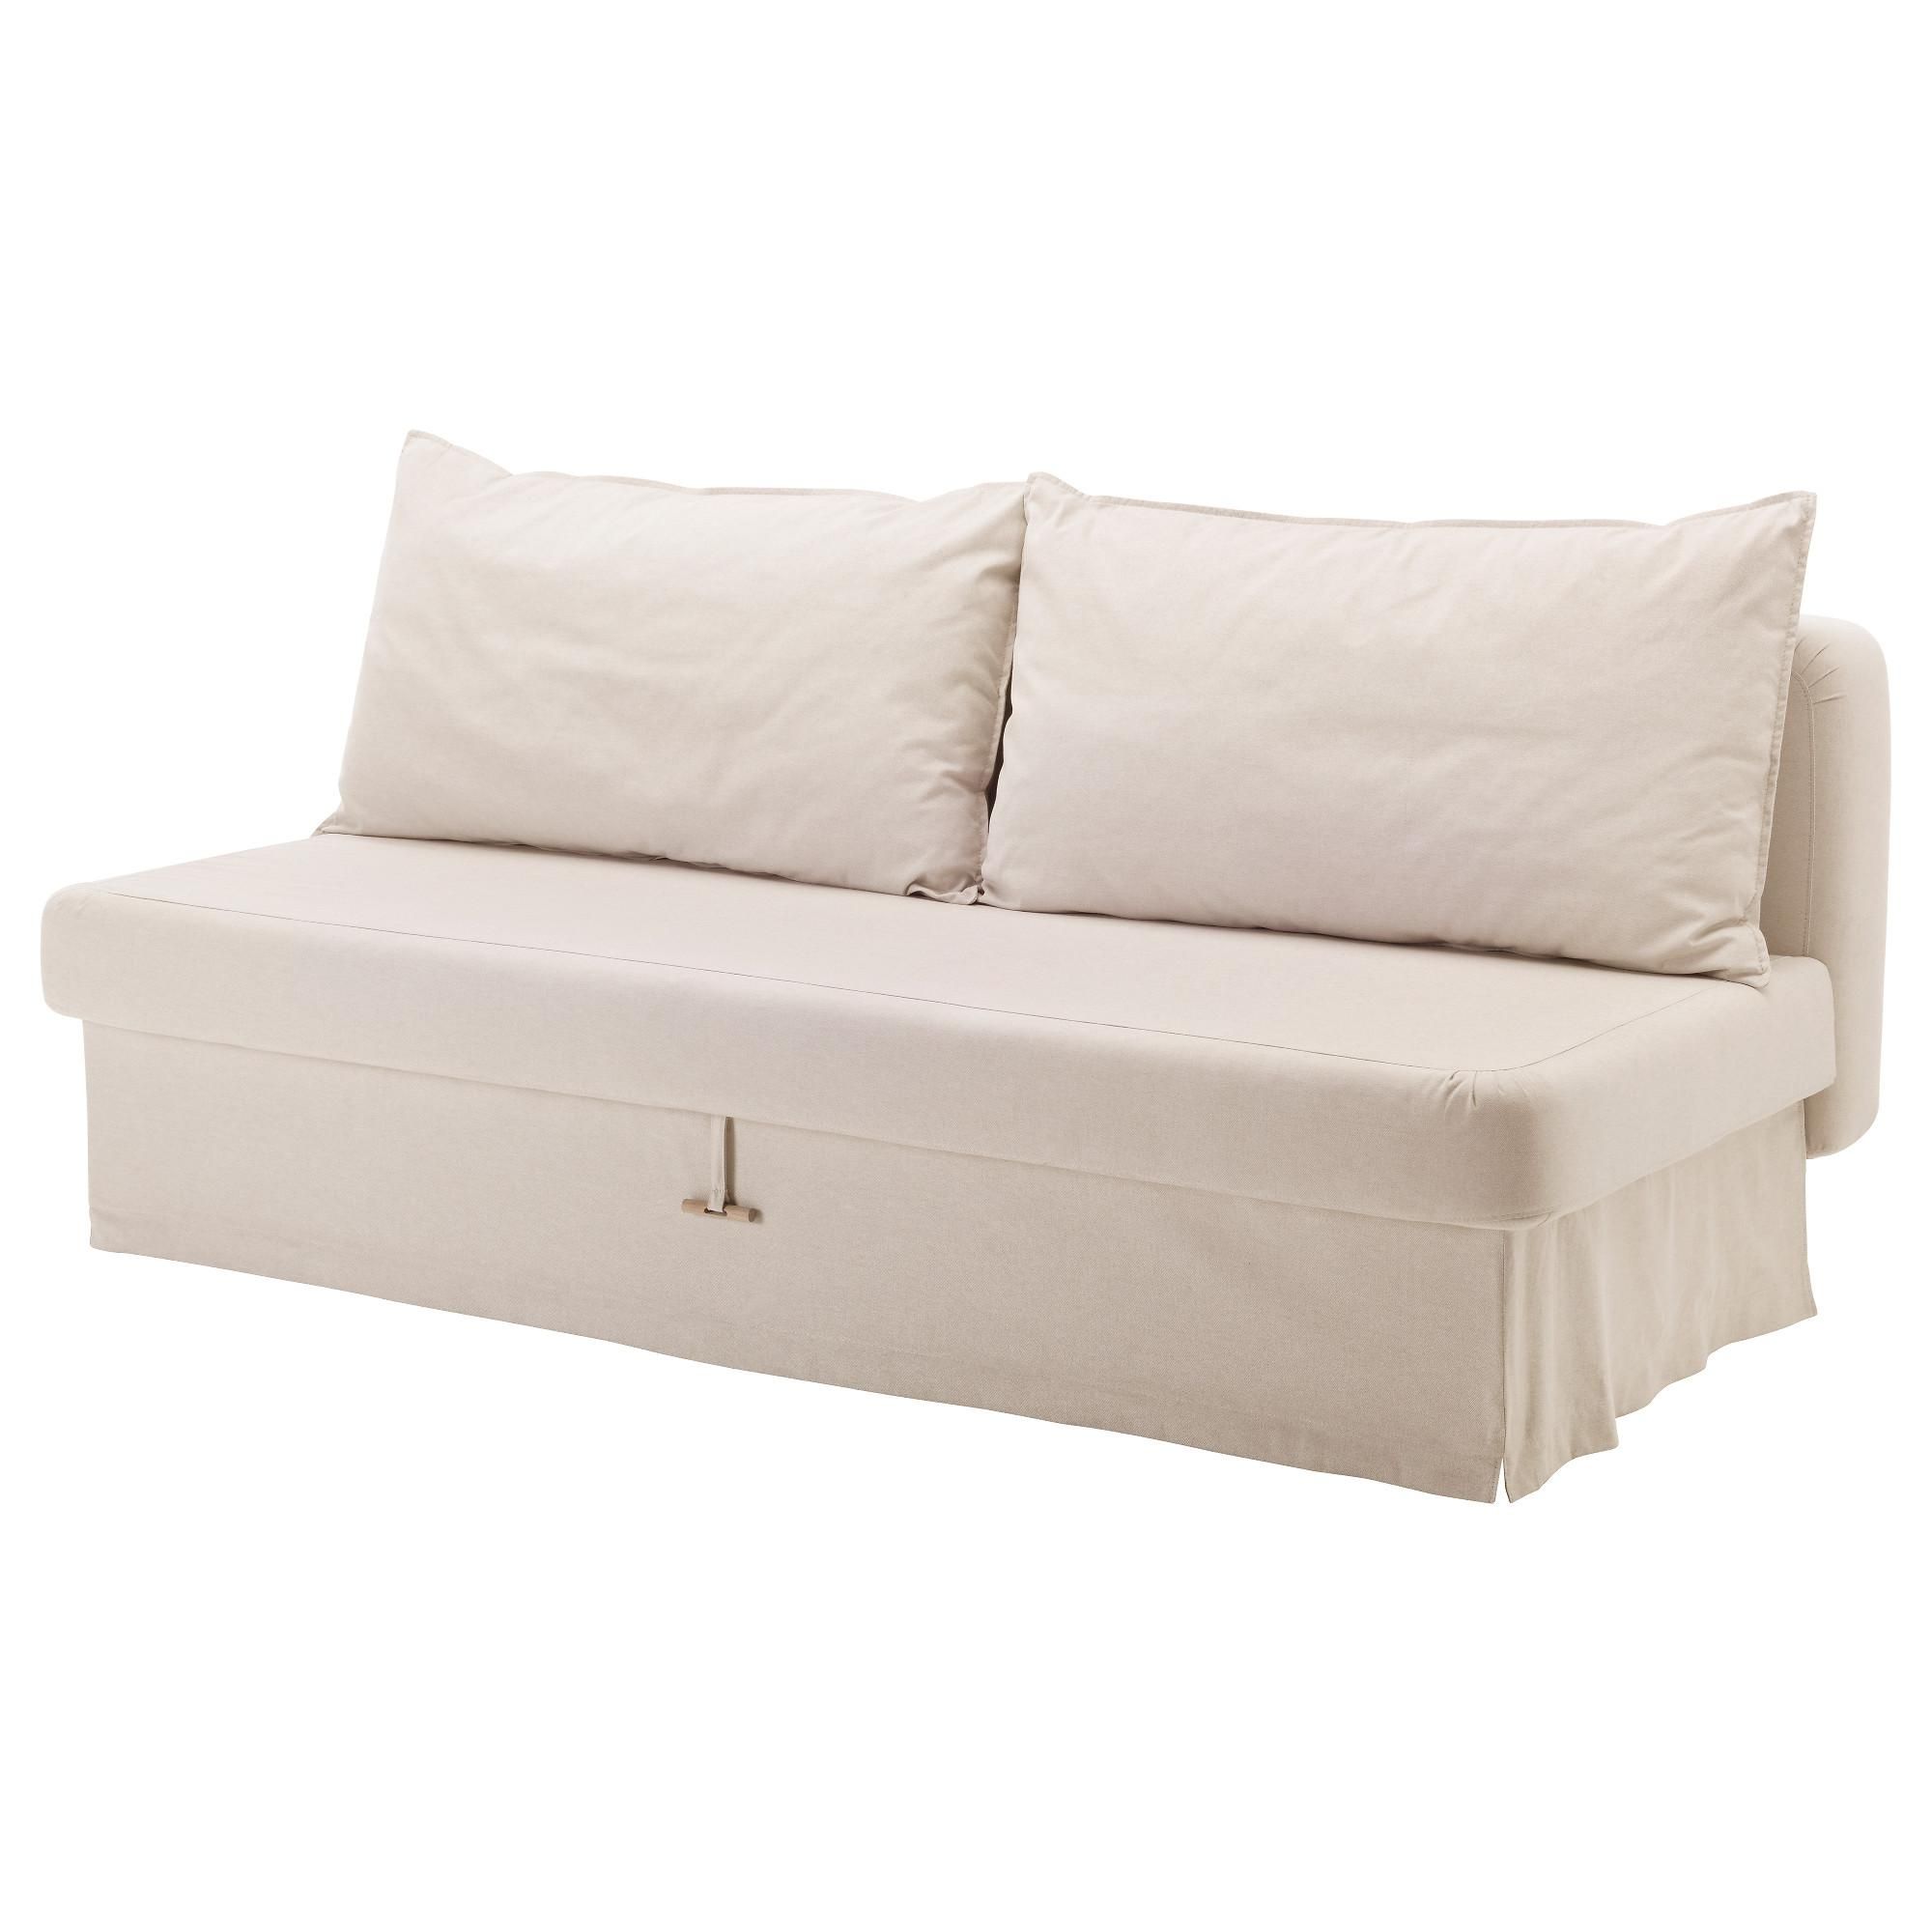 Sofa Beds & Futons – Ikea Intended For Ikea Single Sofa Beds (View 3 of 23)